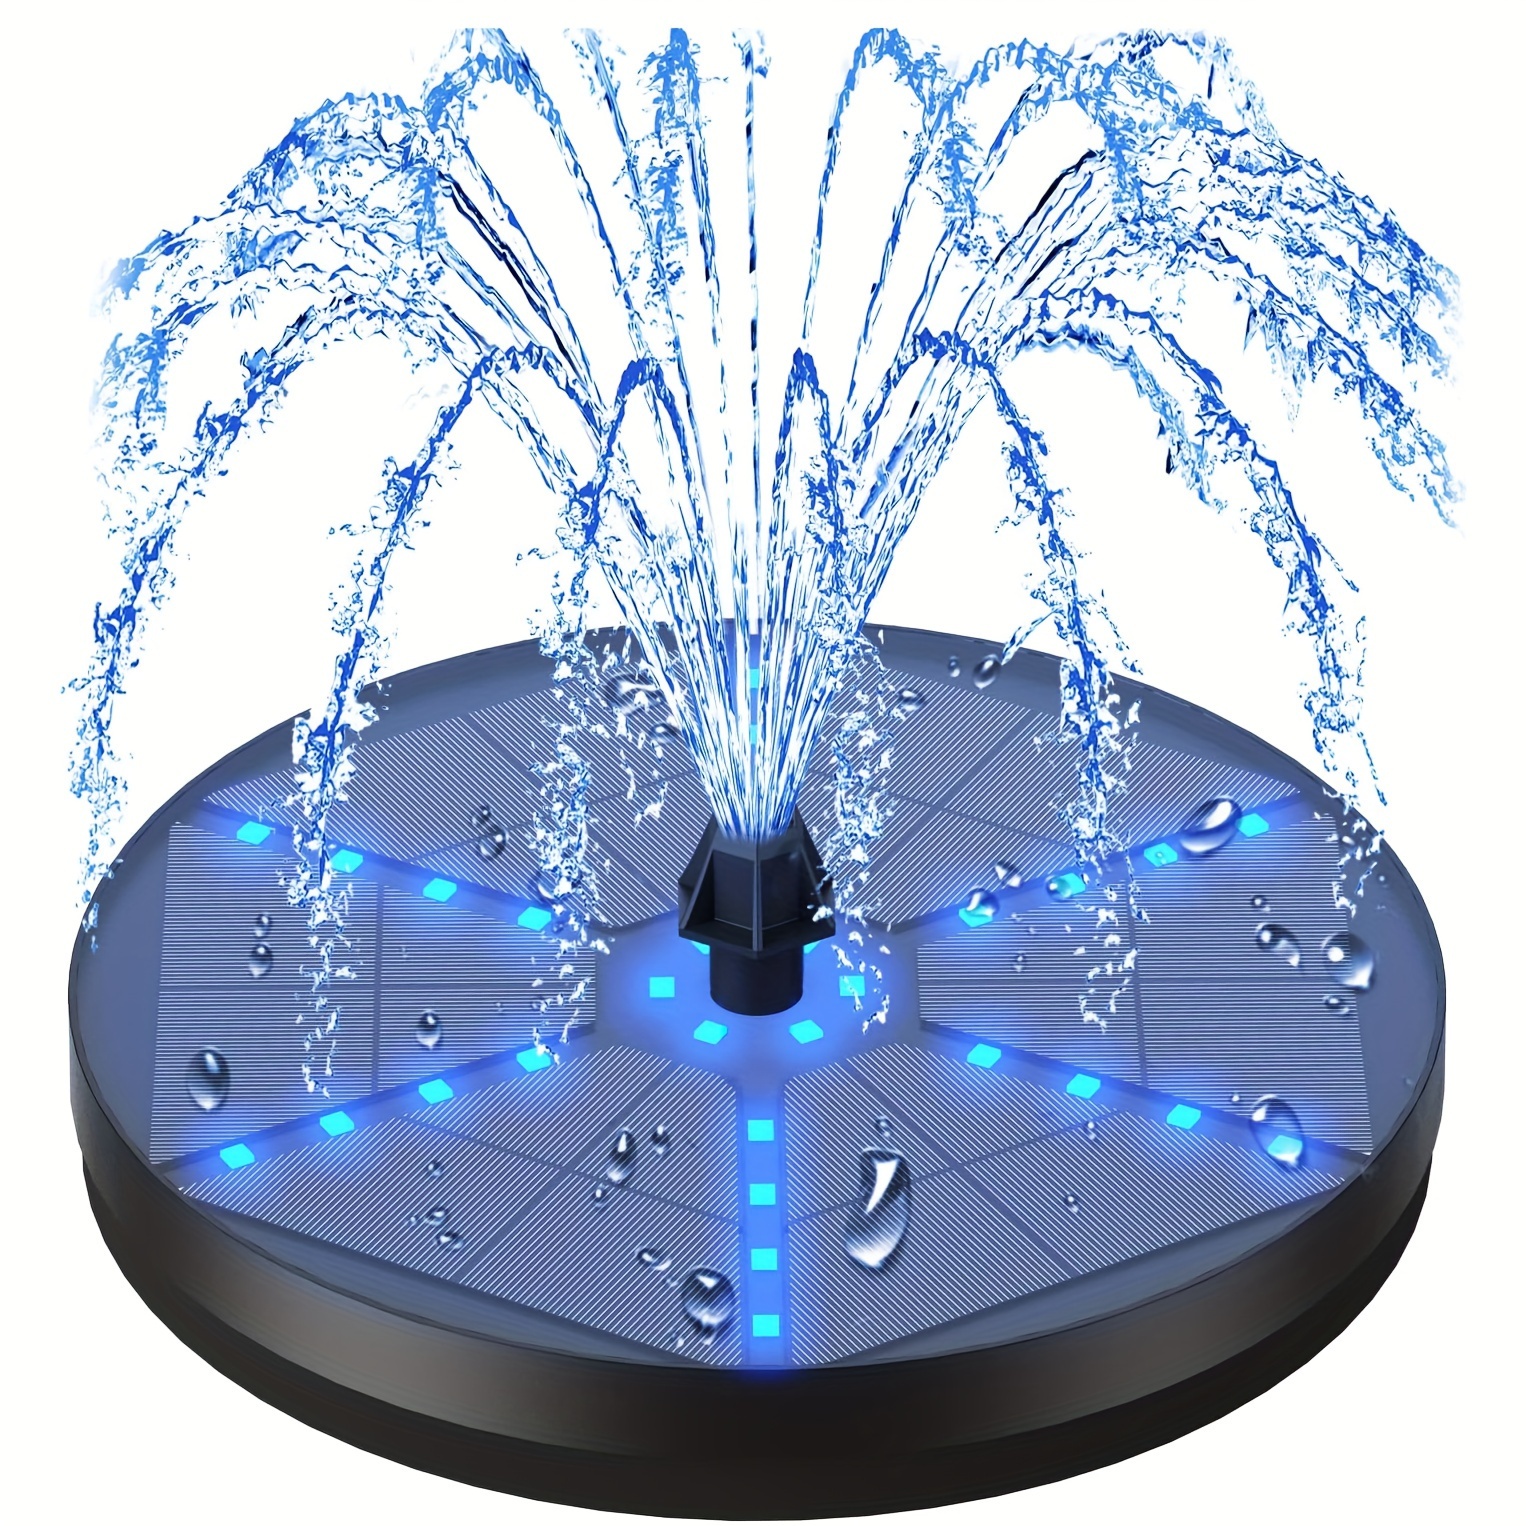 

1 Set Solar Powered Floating Fountain, With Color-changing Led Lights And Nuzzles, Plastic Solar Pond Pump For Outdoor Backyard, Swimming Pool, Park, Artificial Landscape Decoration